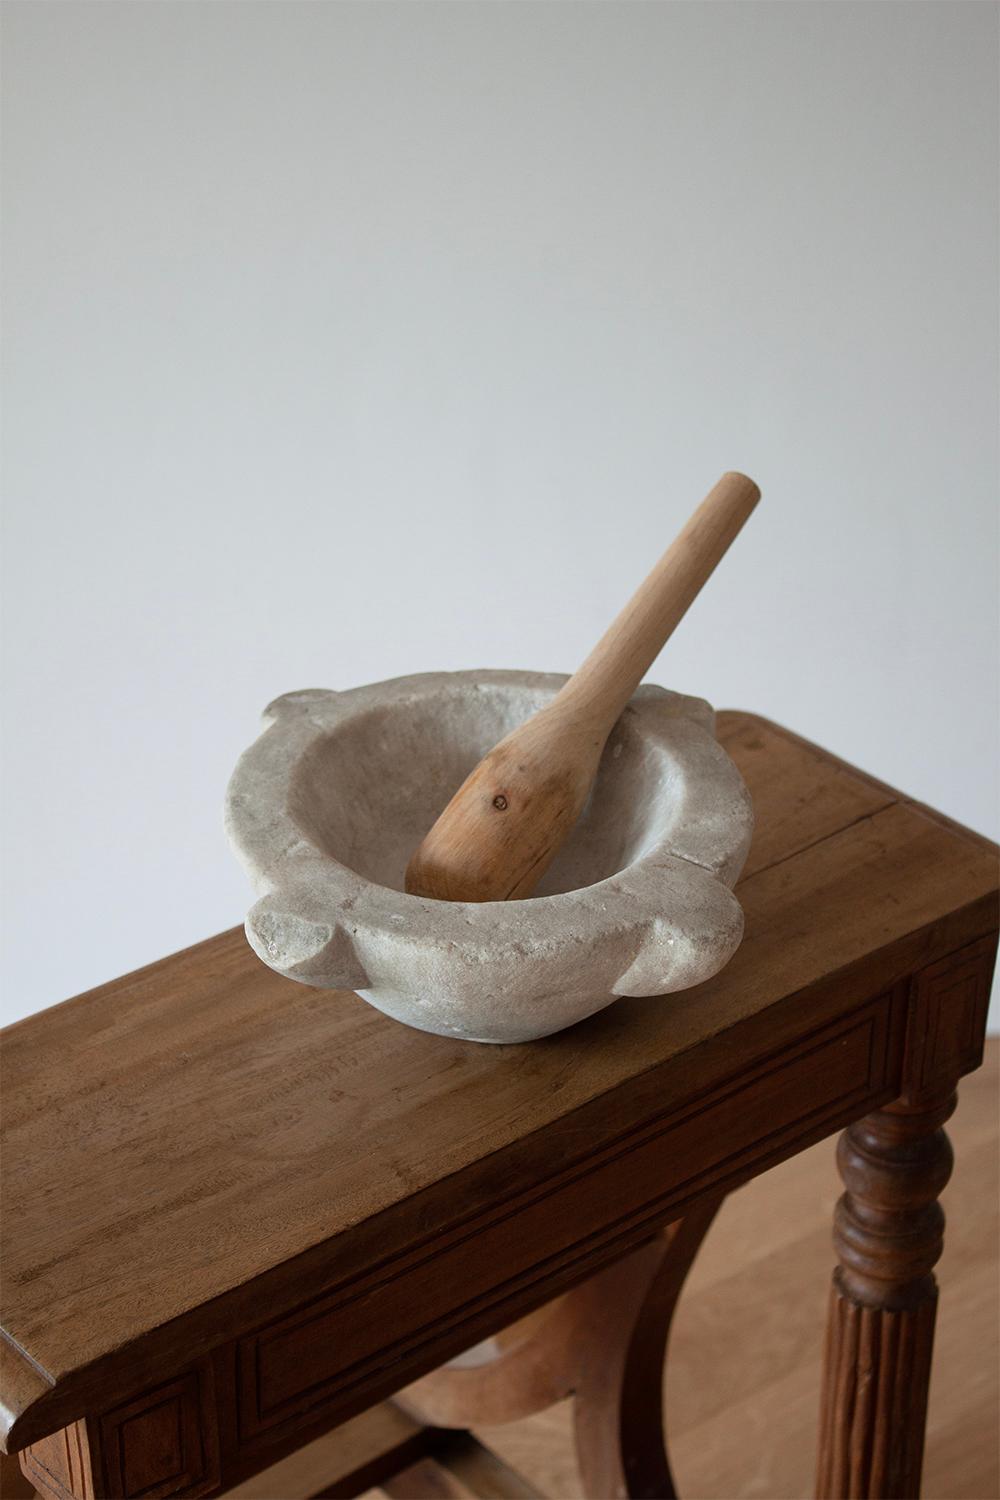 earthenware bowl and pestle